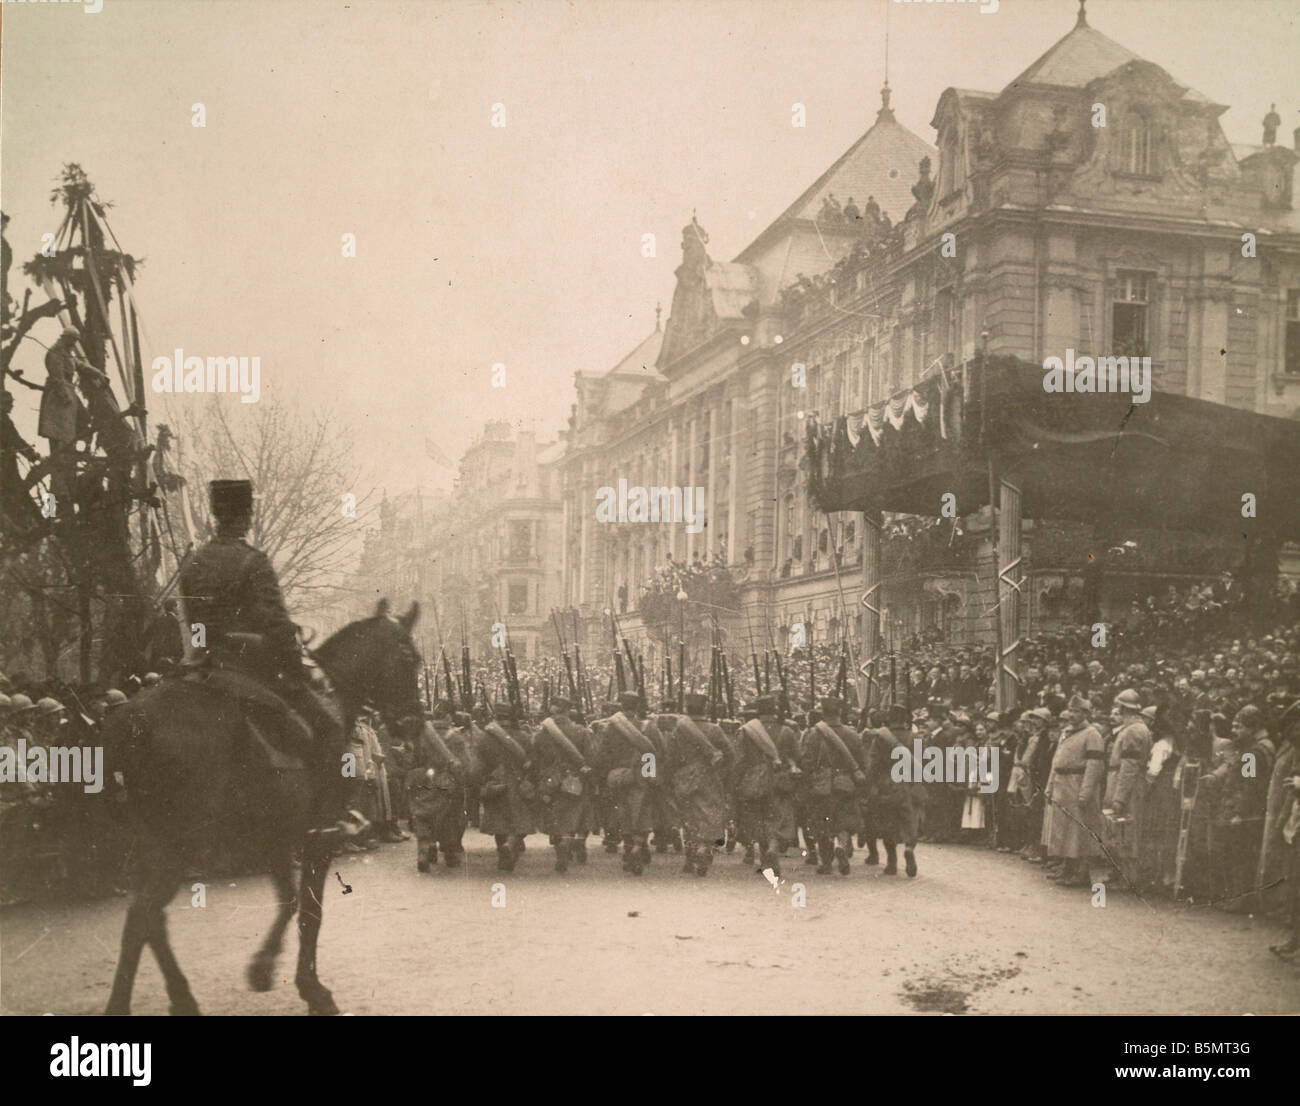 9FK 1918 11 22 A1 3 E French troops in Strasbourg 1918 Photo World War I 1914 18 End of the War Strasbourg is occupied by the Fr Stock Photo